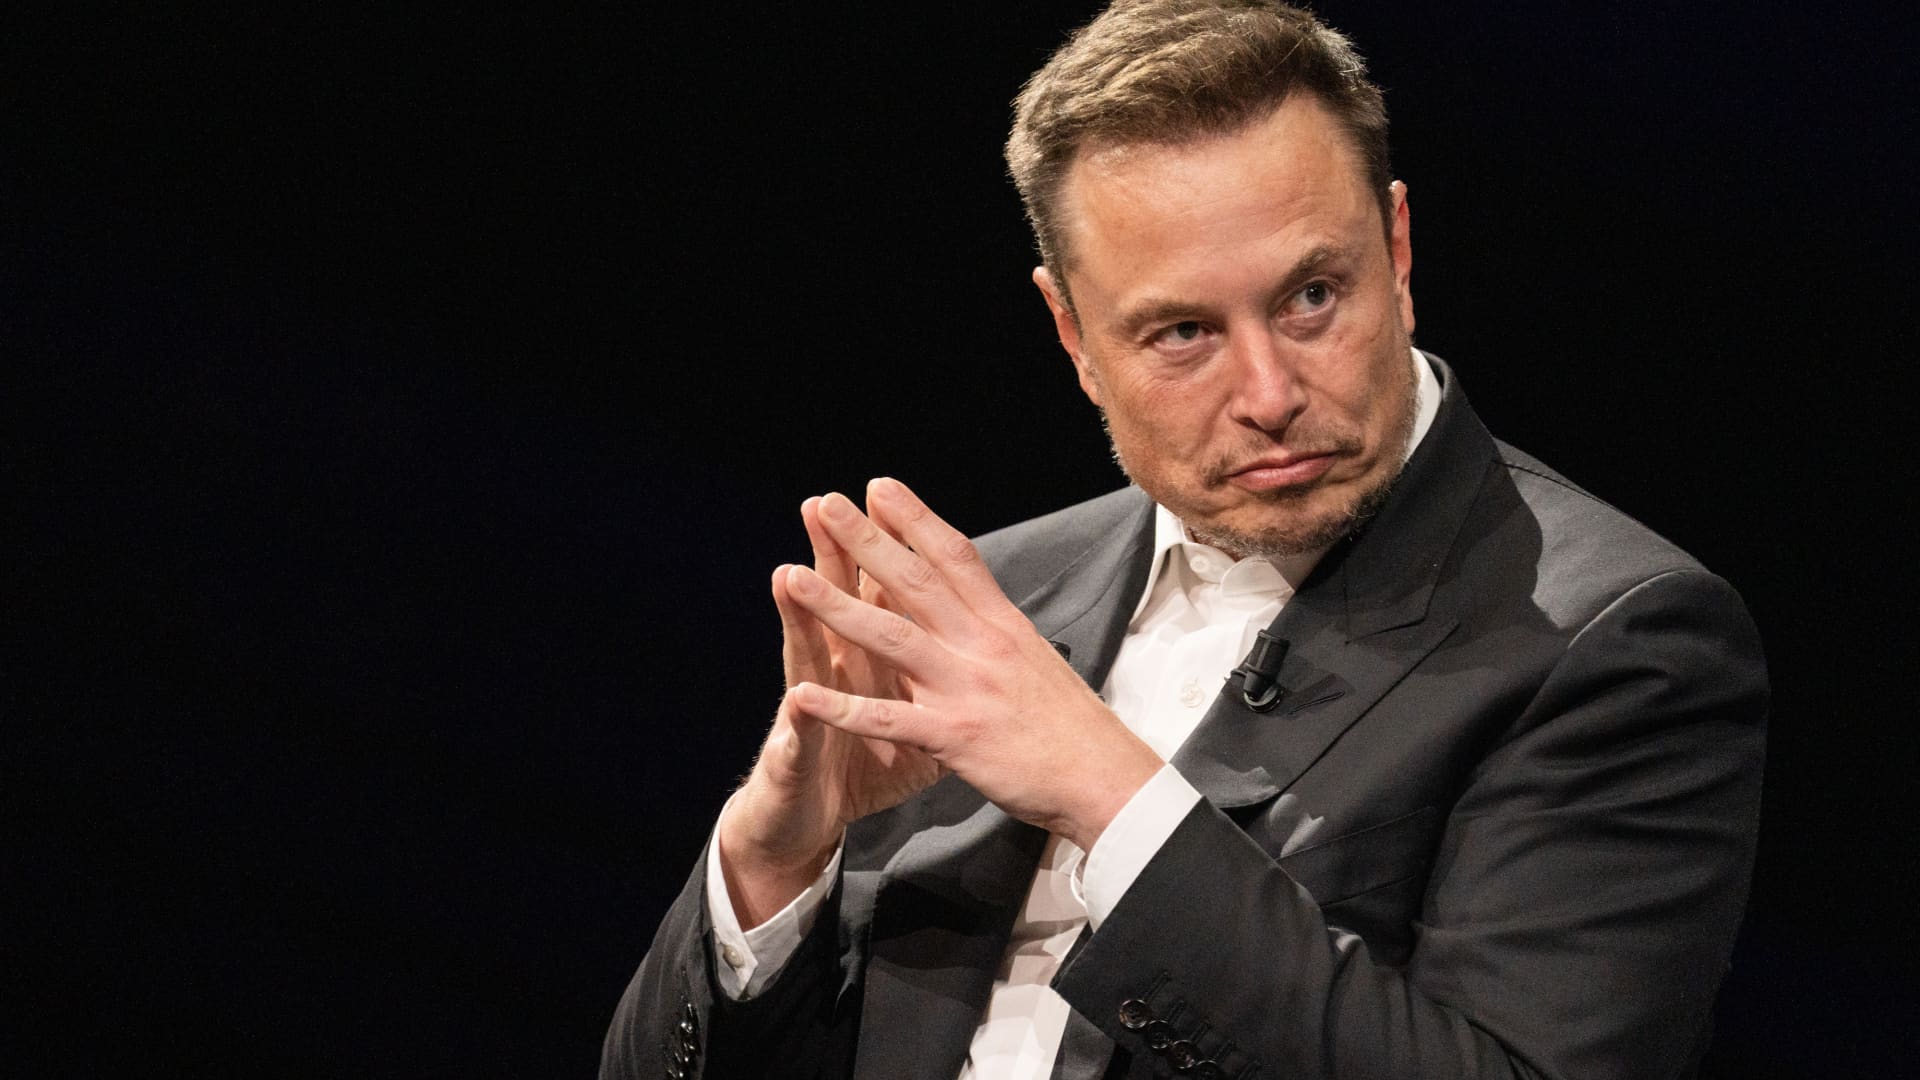 The Elon Musk Verdict: A Ripple in the Ocean of CEO Compensation?